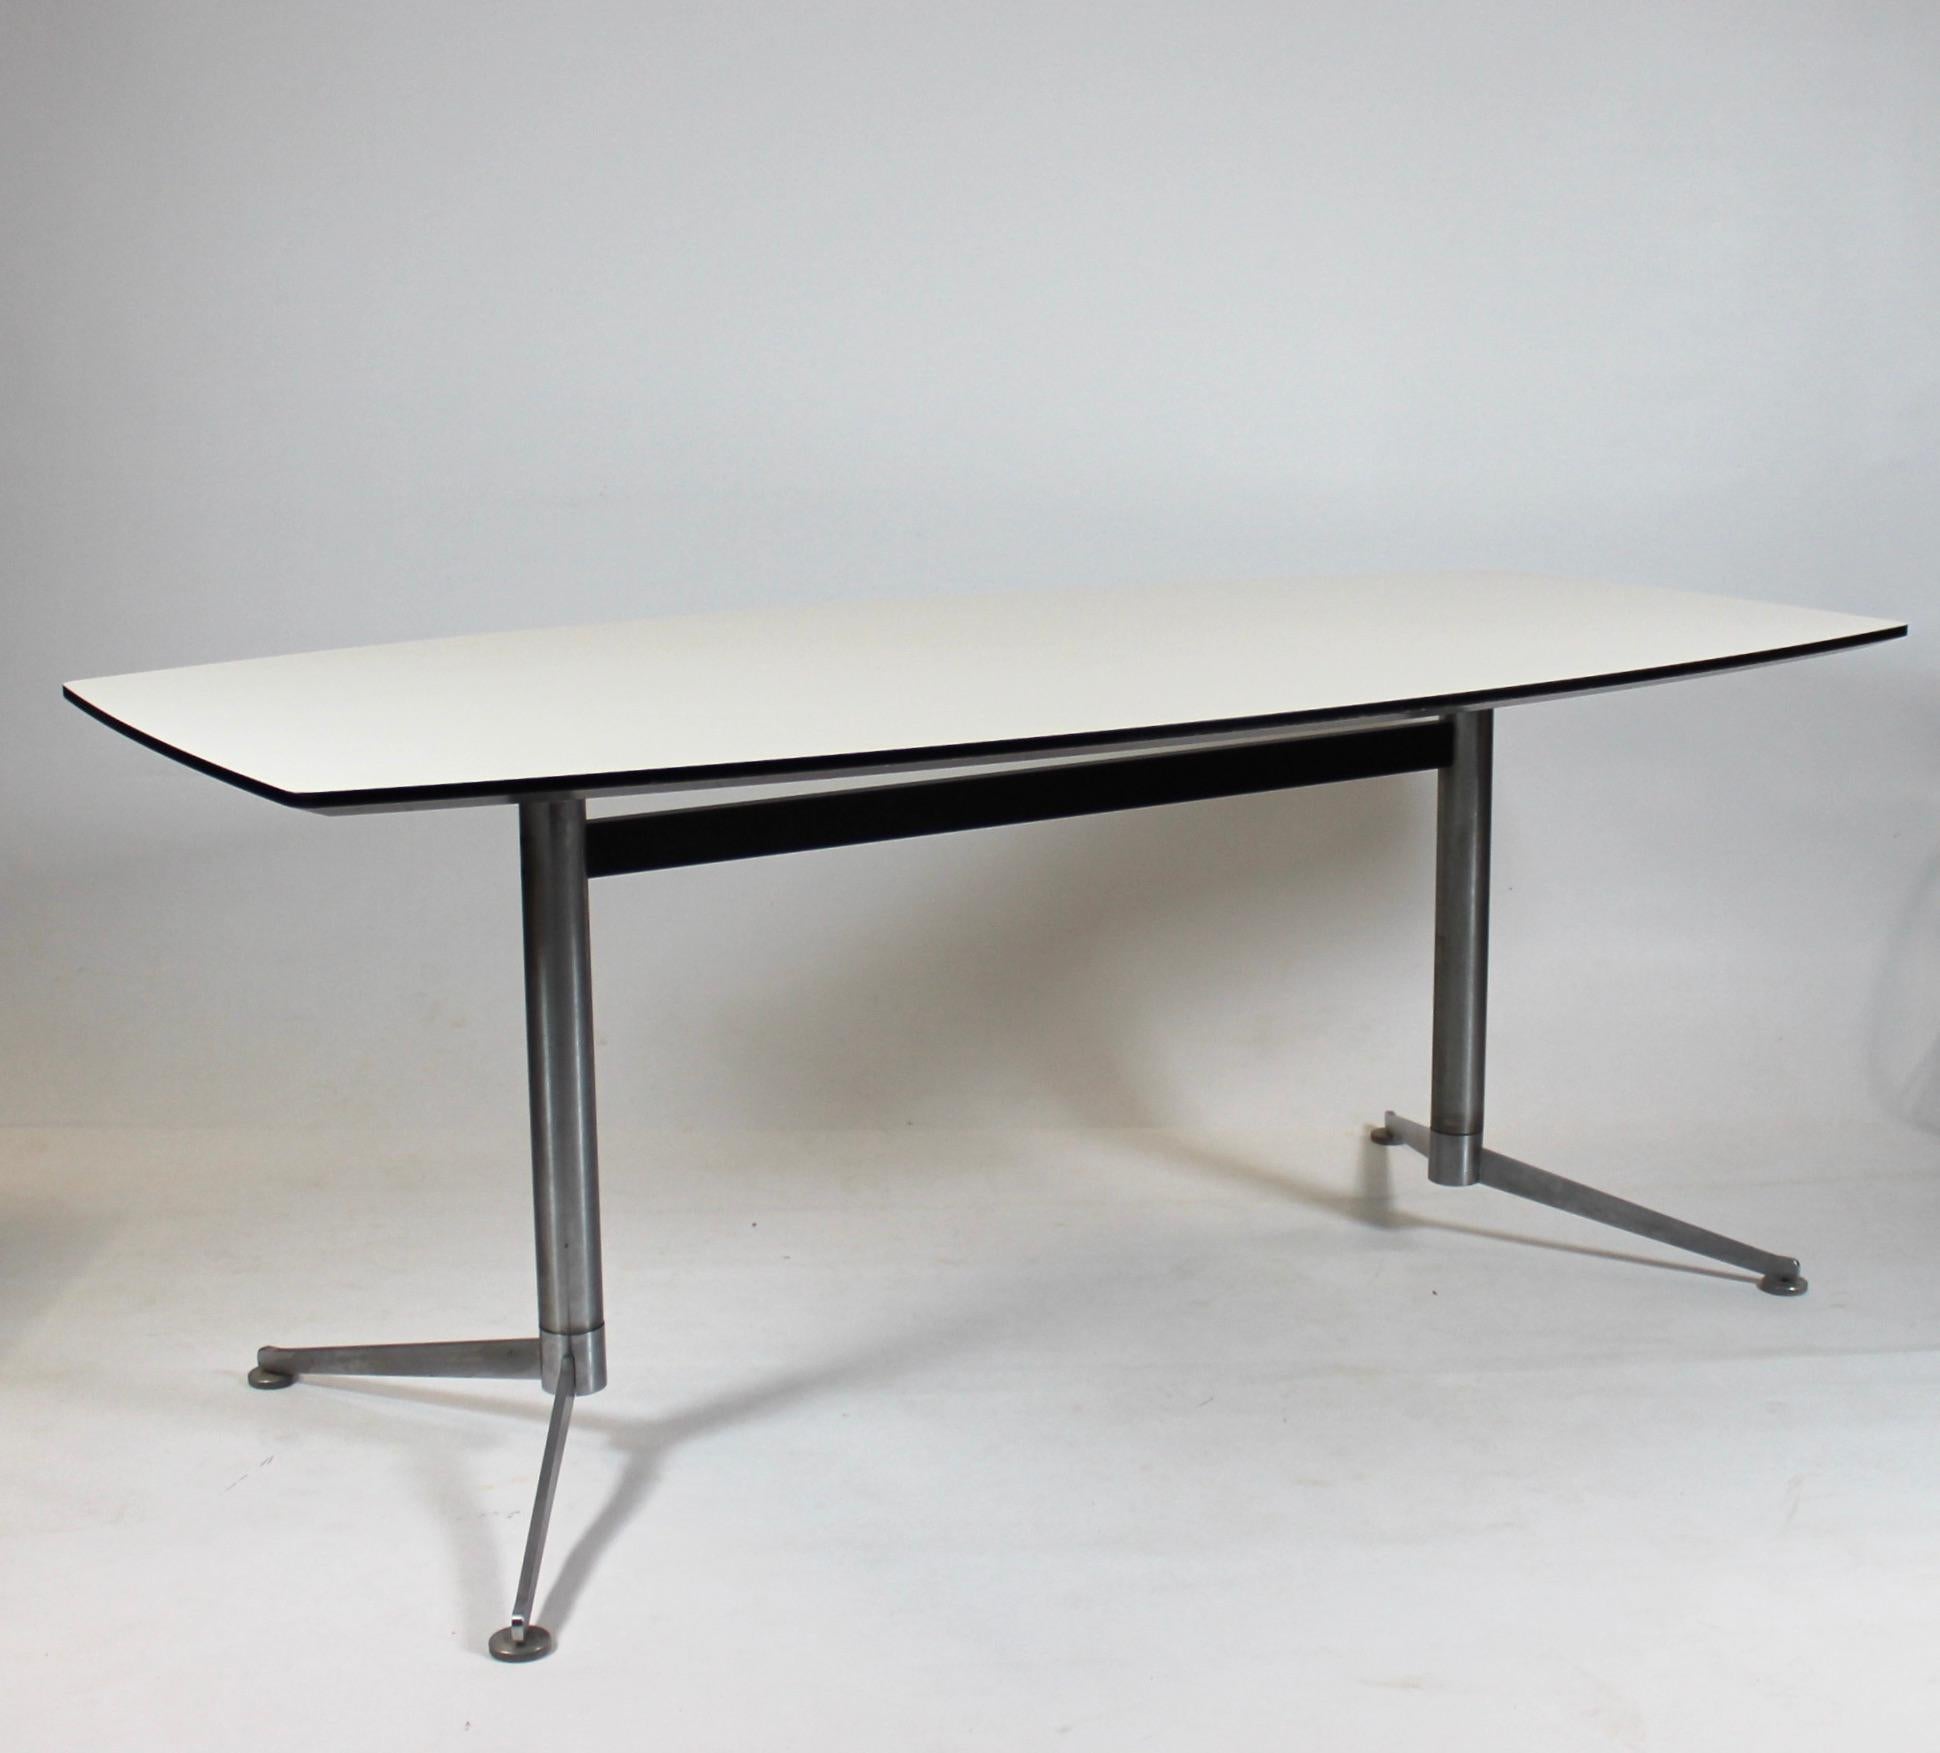 Dining table with white laminate and steel legs by Charles and Ray Eames. The table is in great condition and manufactured on the 19th of October 2005.